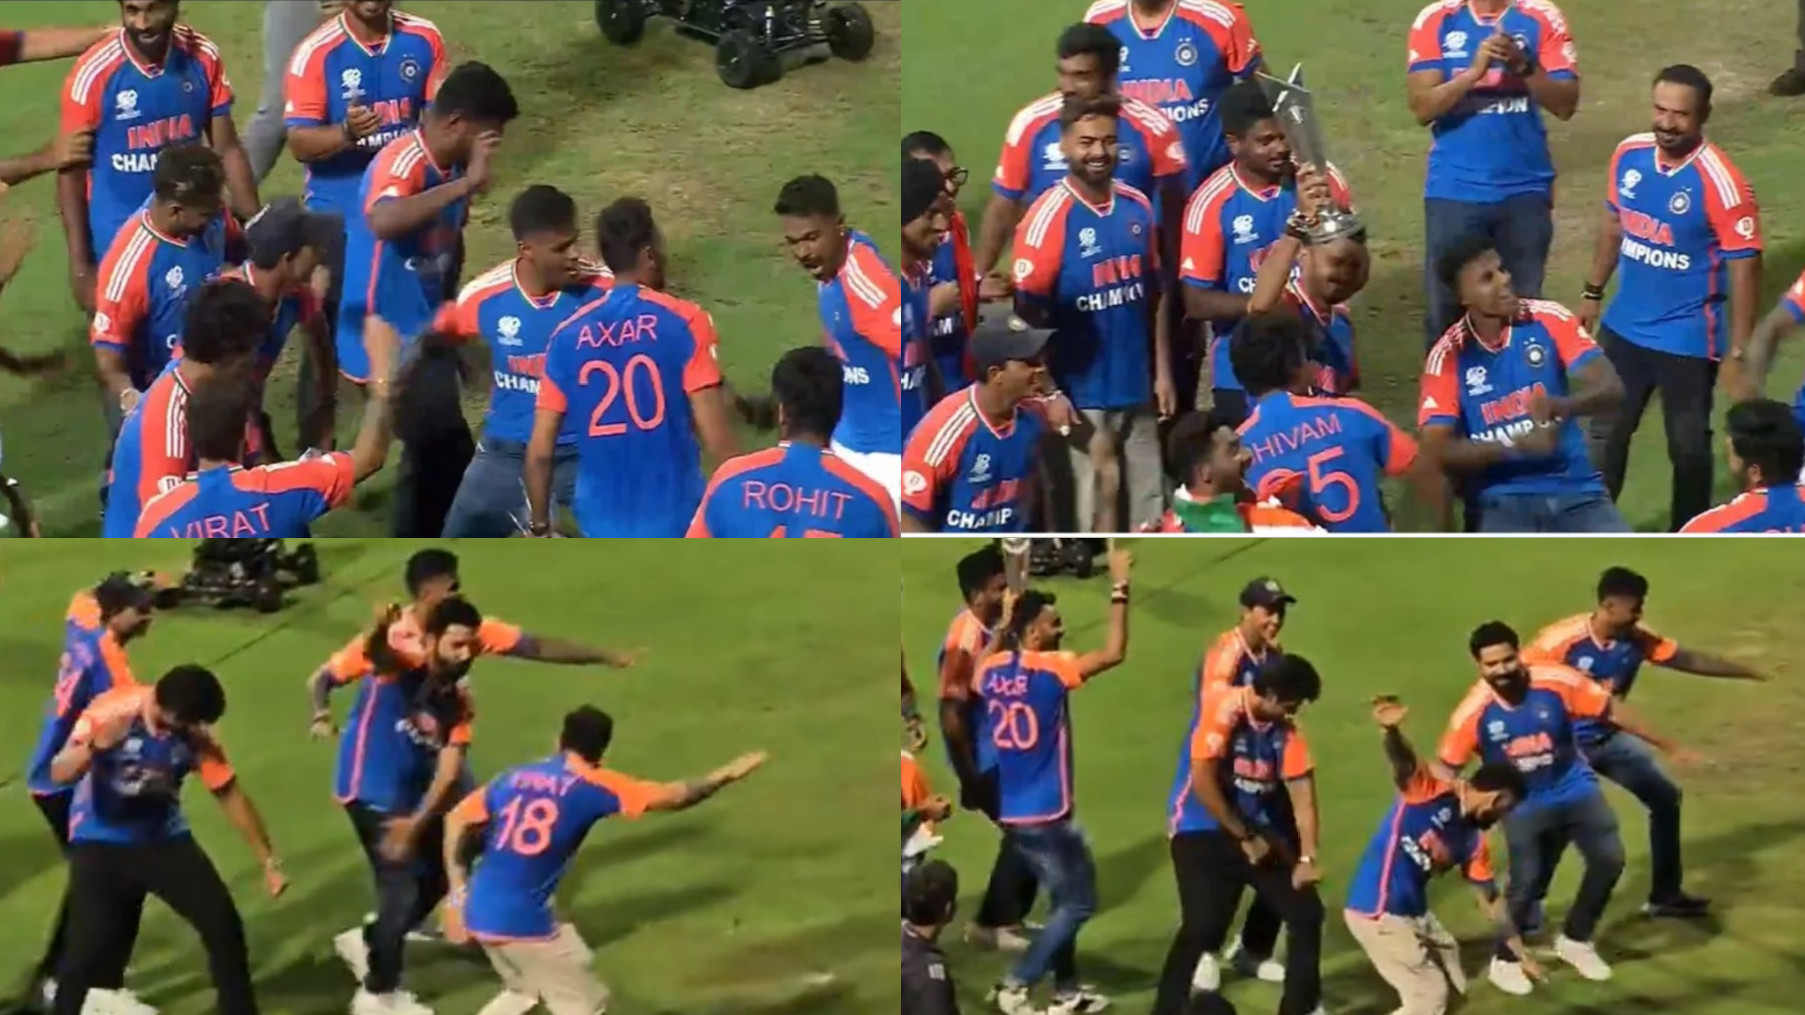 WATCH- Virat Kohli, Rohit Sharma and all Indian players dance to ‘Chak De India’ song at Wankhede stadium